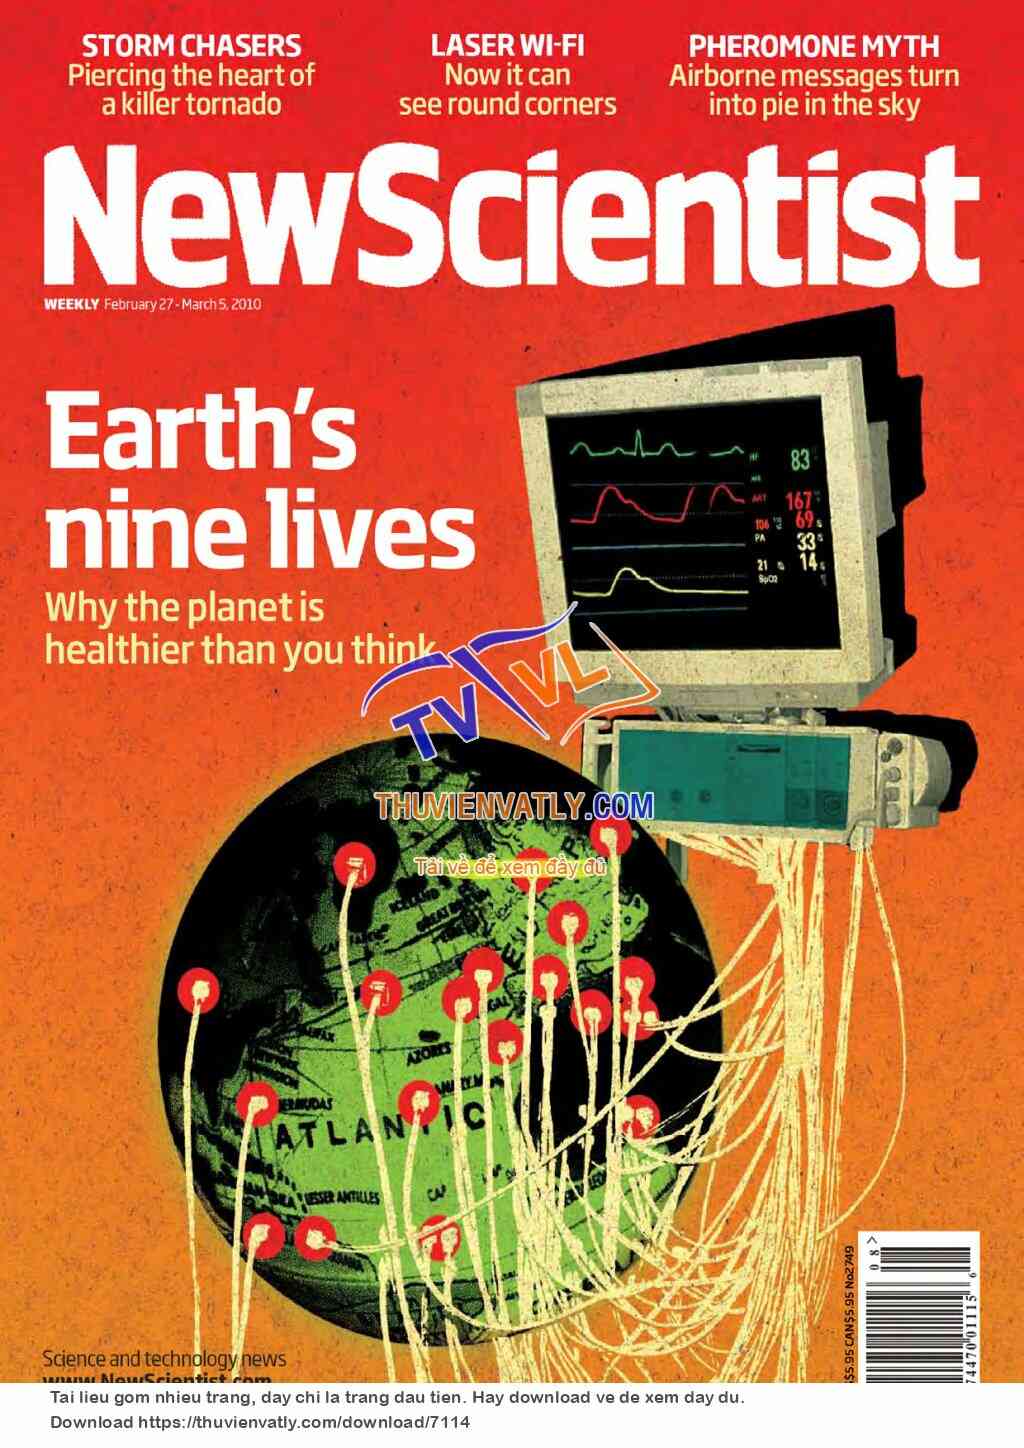 New Scientist - 27 February 2010